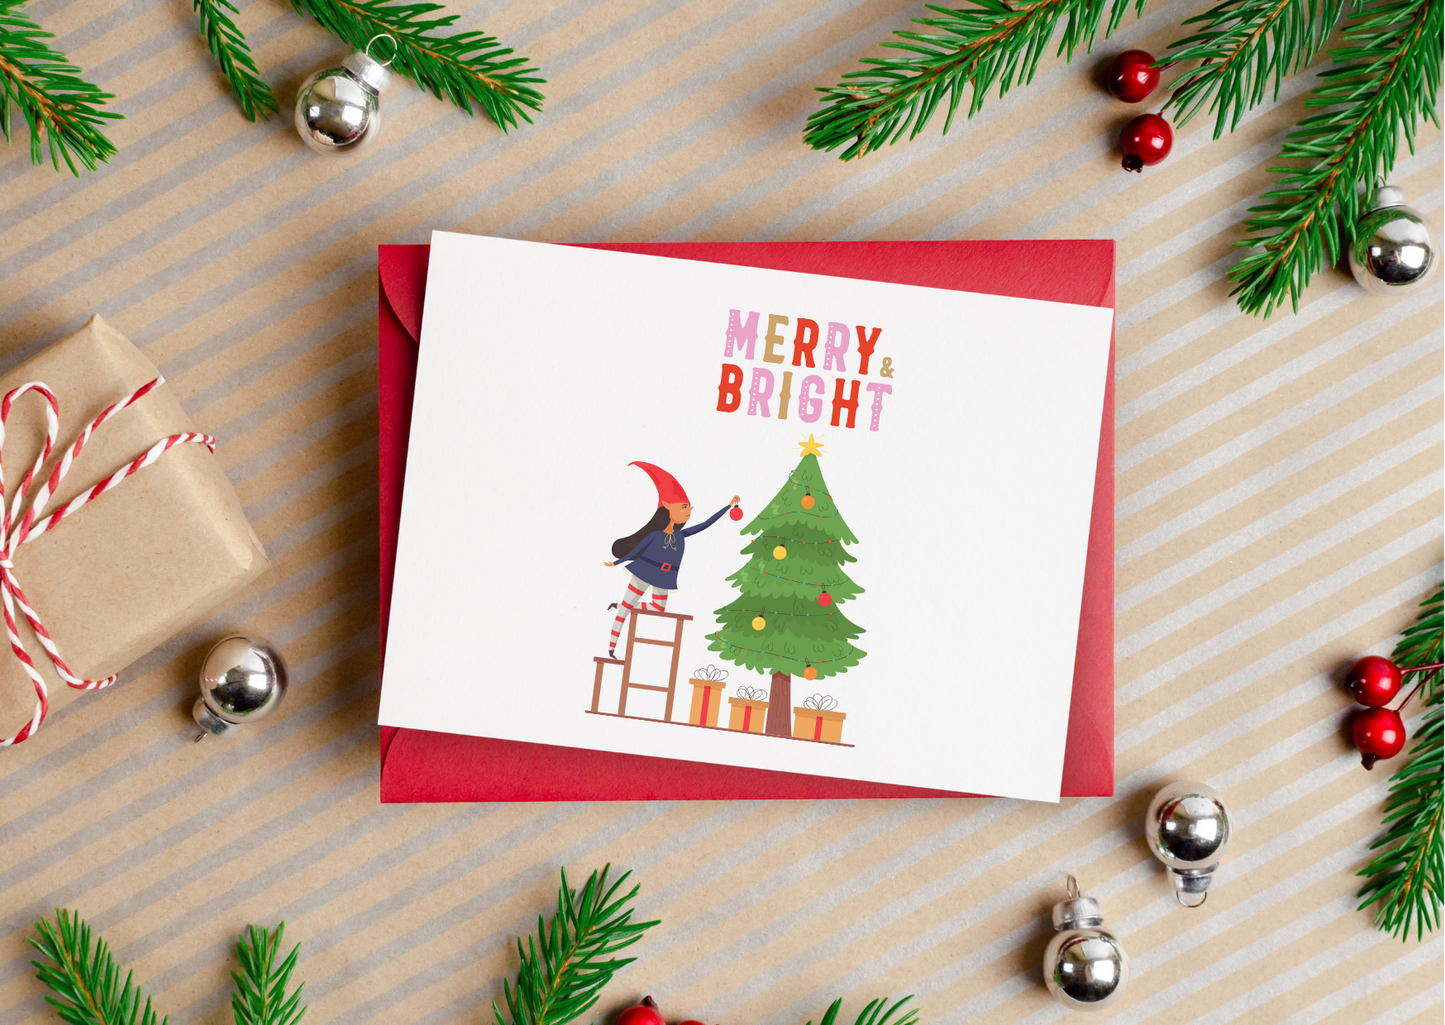 Merry & Bright- Elf & the tree- Christmas cards